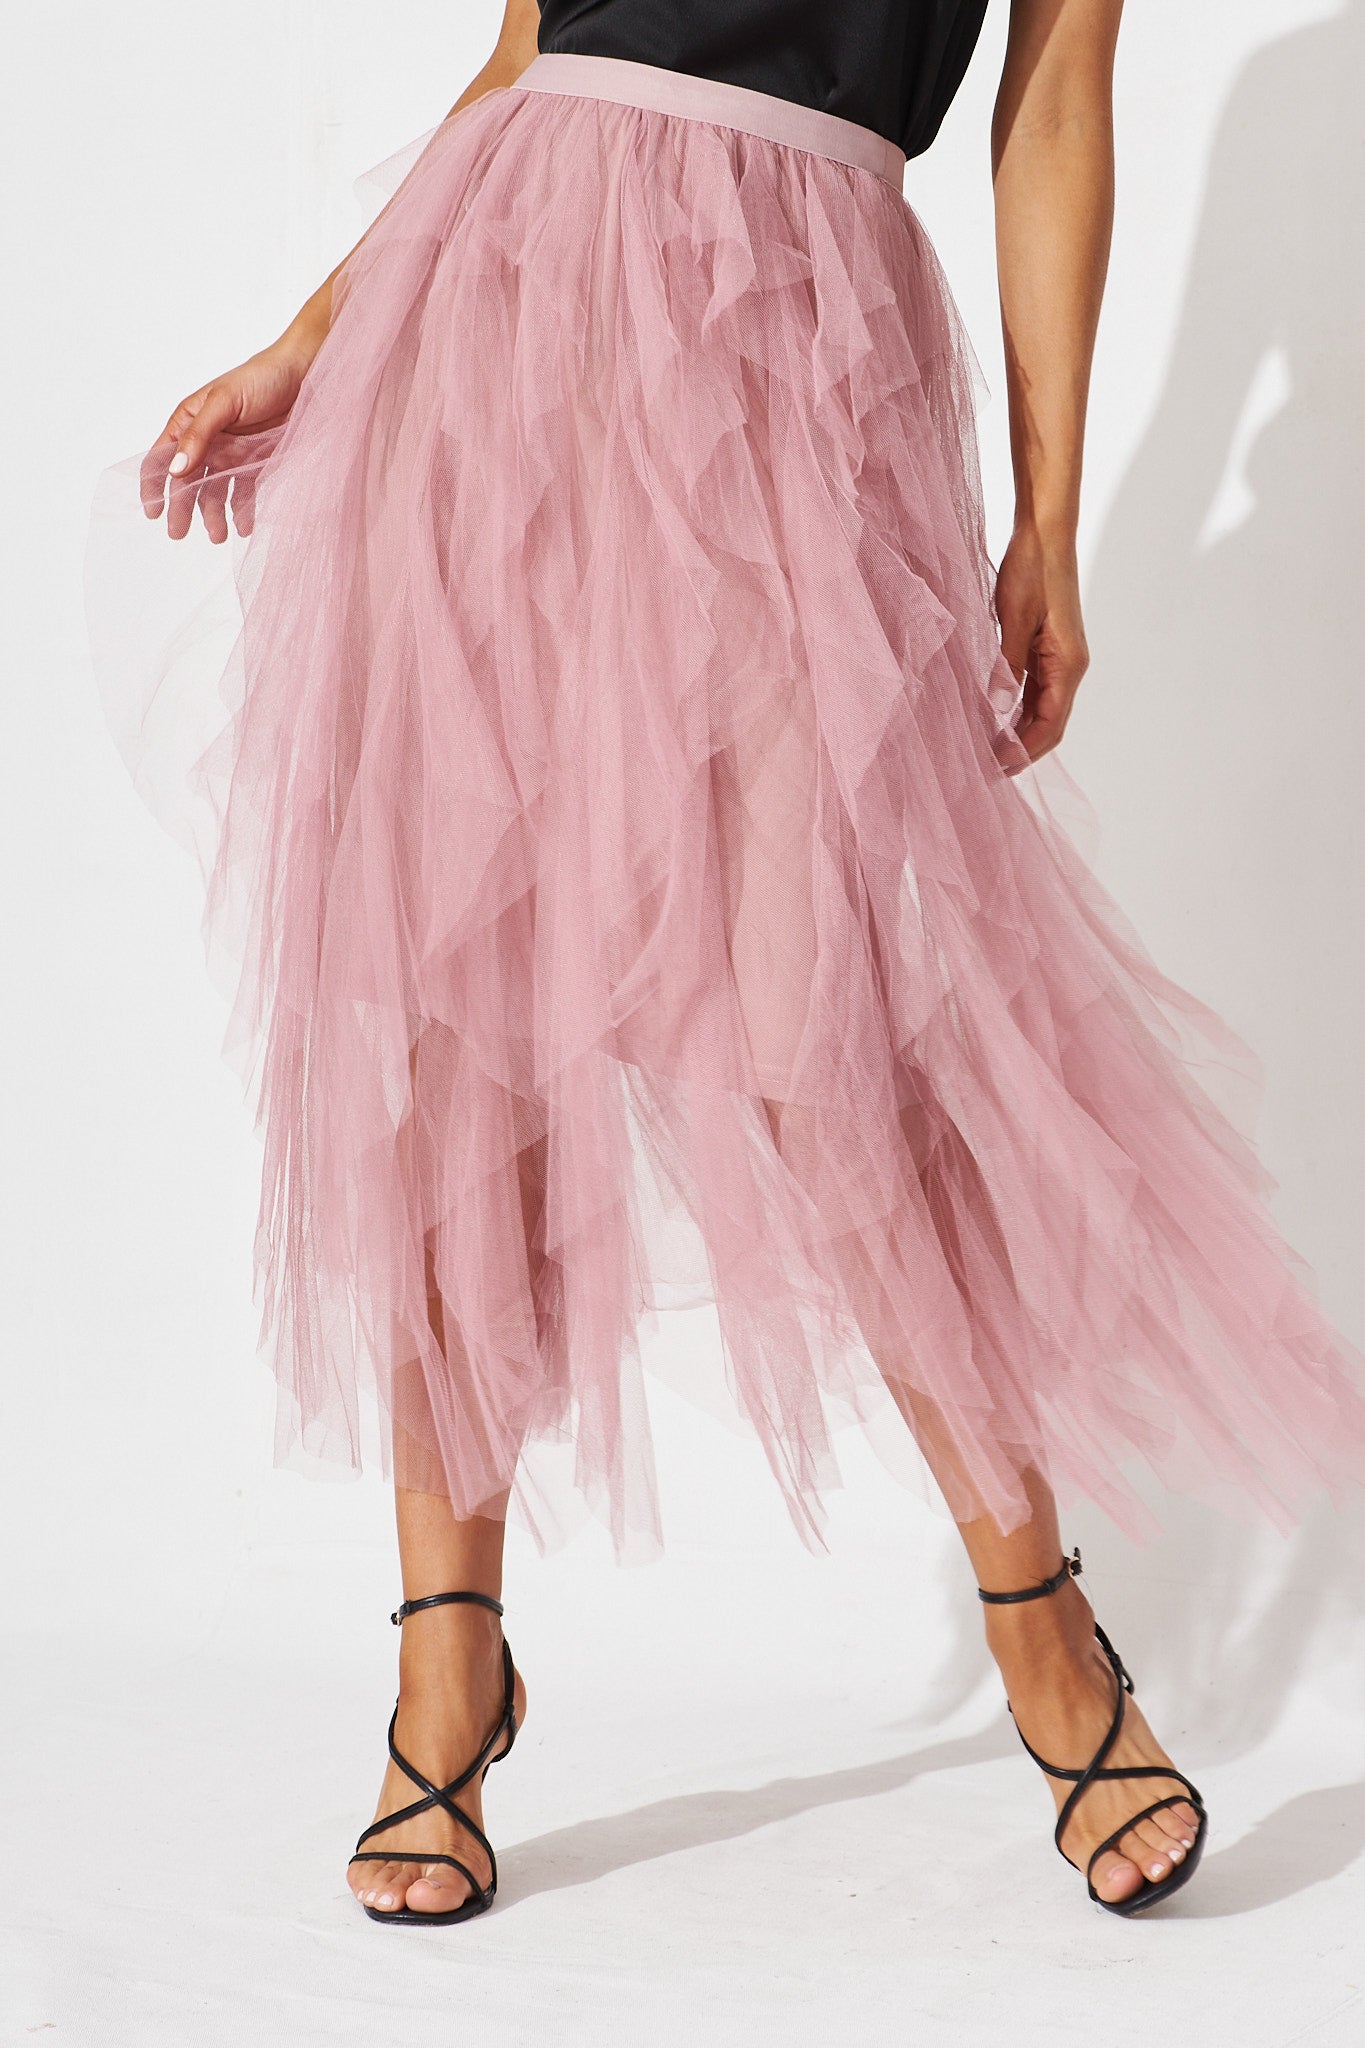 Tulle Skirt – Cynthia Rowley, 53% OFF